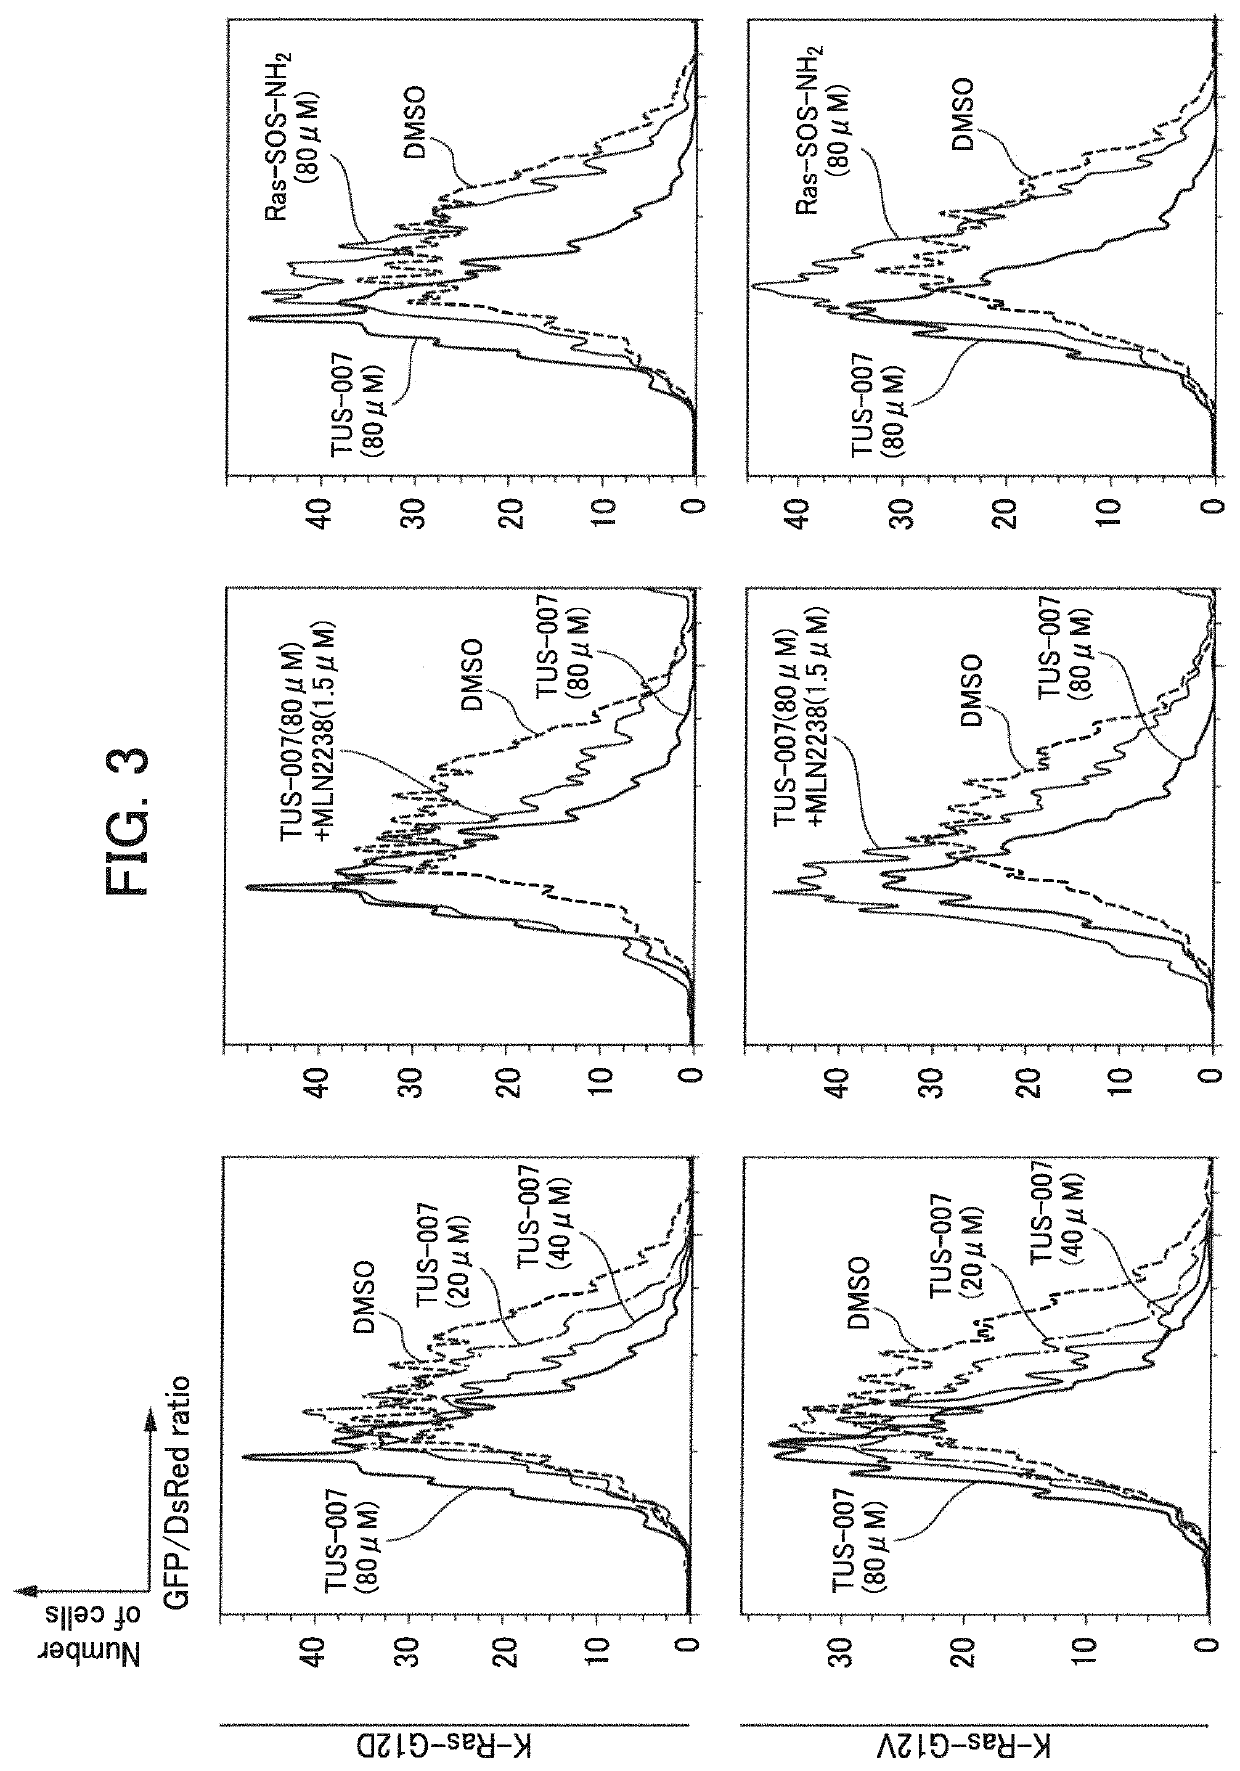 Ras protein degradation inducing molecule and pharmaceutical composition